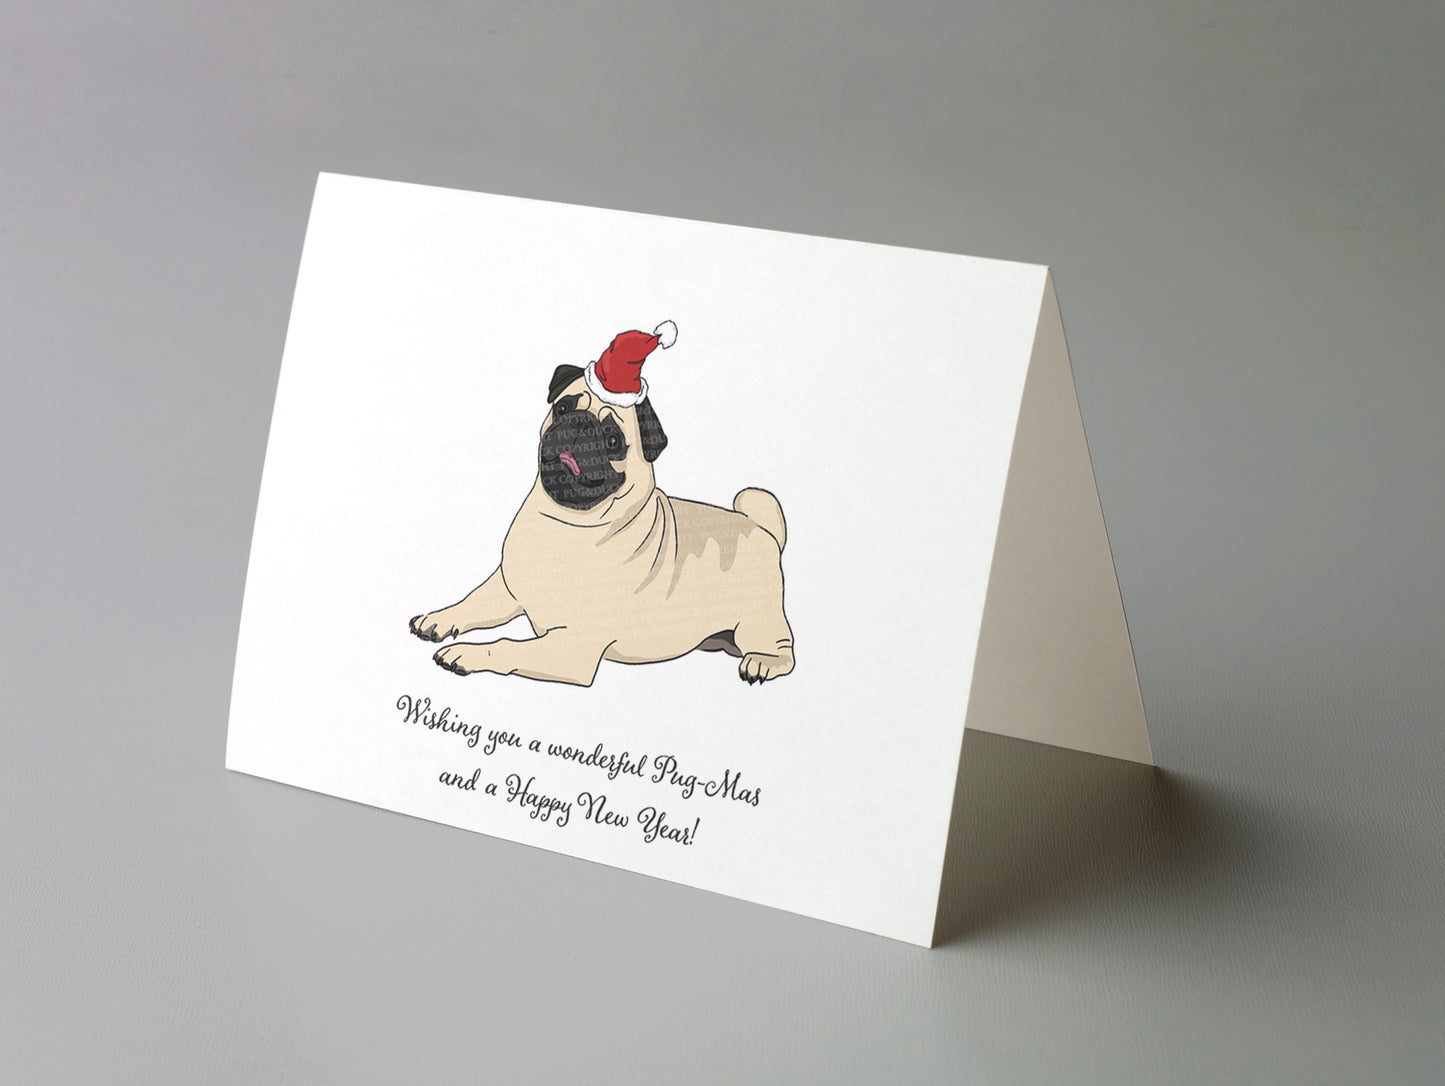 Mops Grußkarte "Wishing you a wonderful Pug-Mas and a Happy New Year!" mit Umschlag